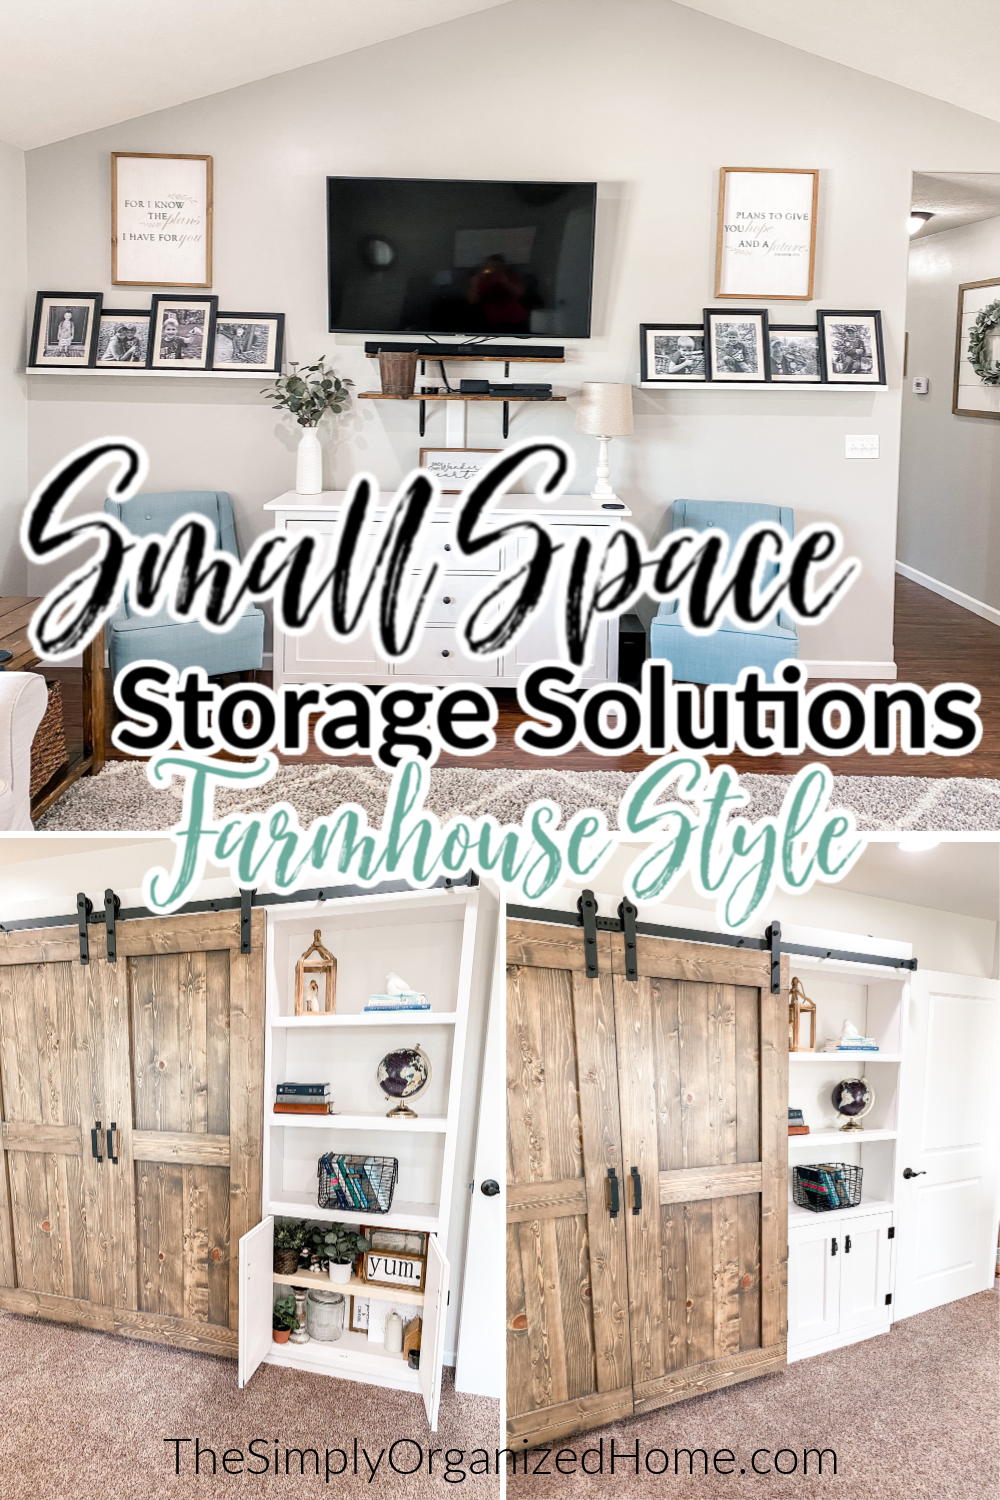 https://www.thesimplyorganizedhome.com/wp-content/uploads/2020/05/Small-Space-Storage-Solutions.png